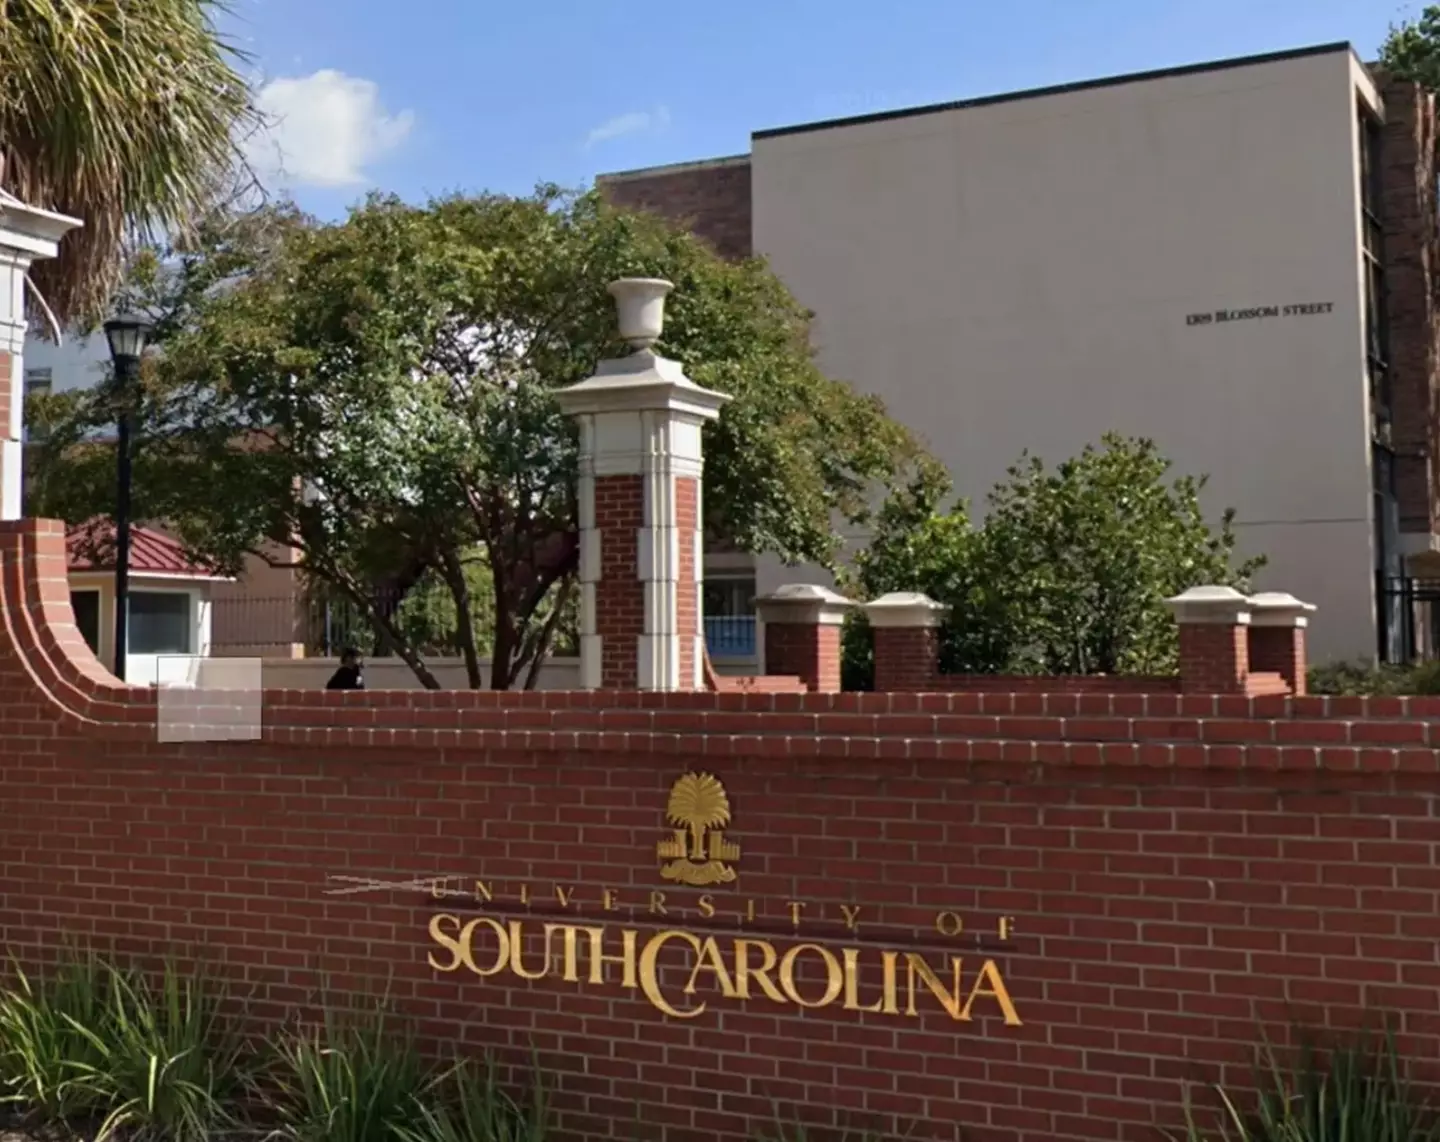 The 20-year-old was a student at the University of South Carolina.